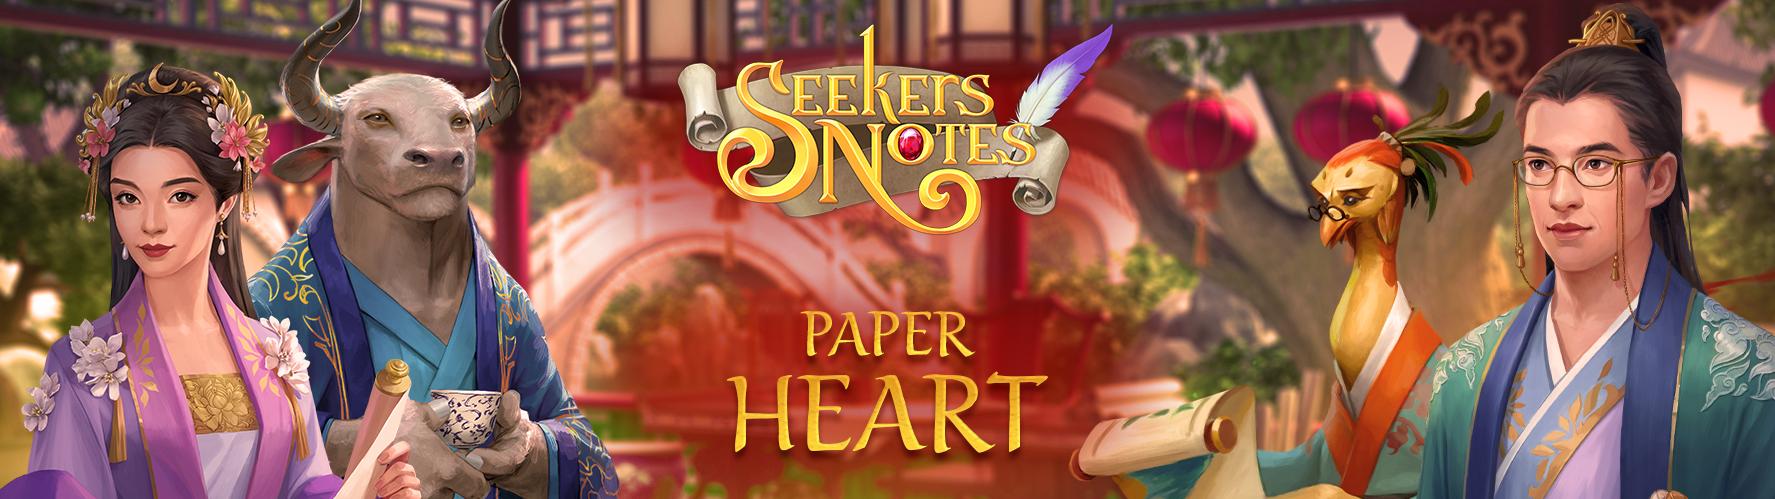 SEEKERS NOTES. UPDATE 2.7: PAPER HEART